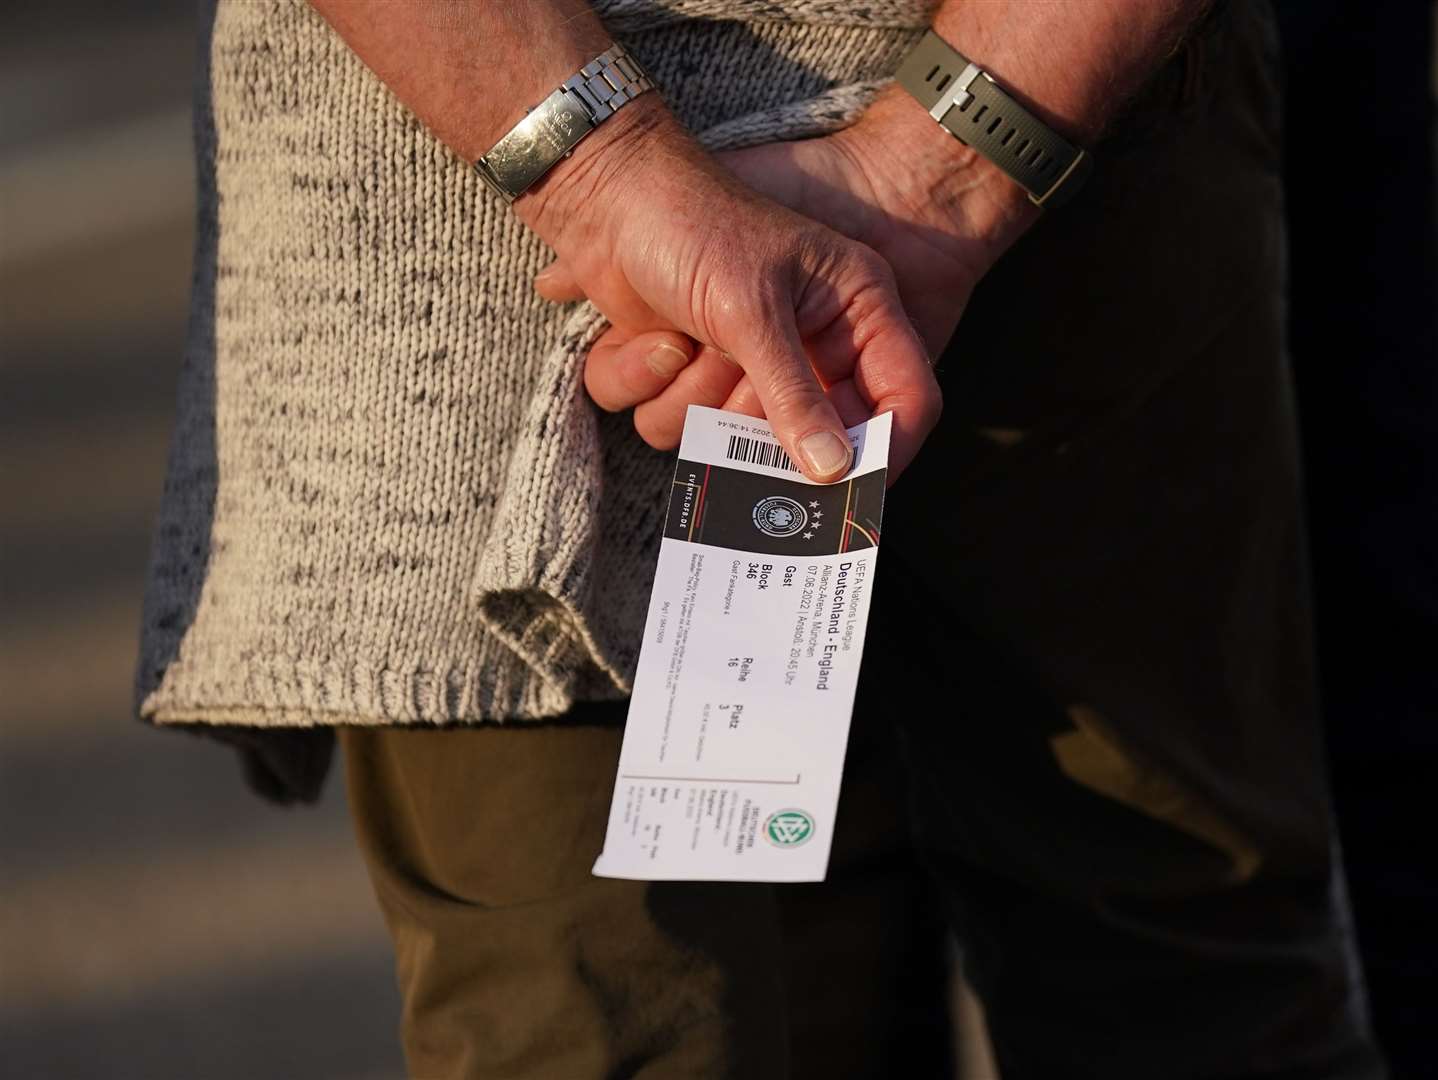 An England fan holds a ticket at the Allianz Arena in Munich (Yui Mok/PA)